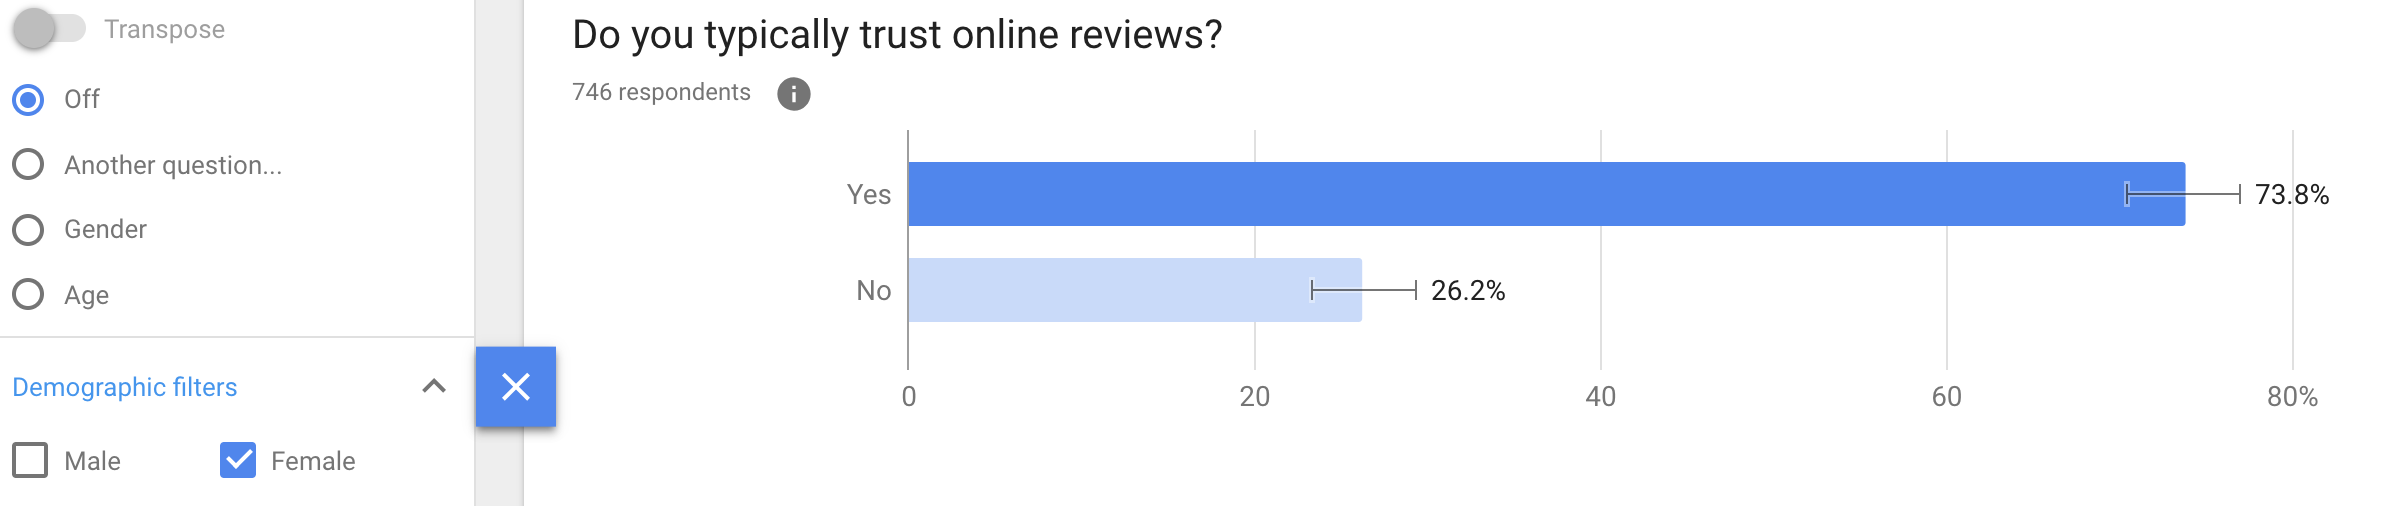 Do you typically trust online reviews? Demographic (Male)